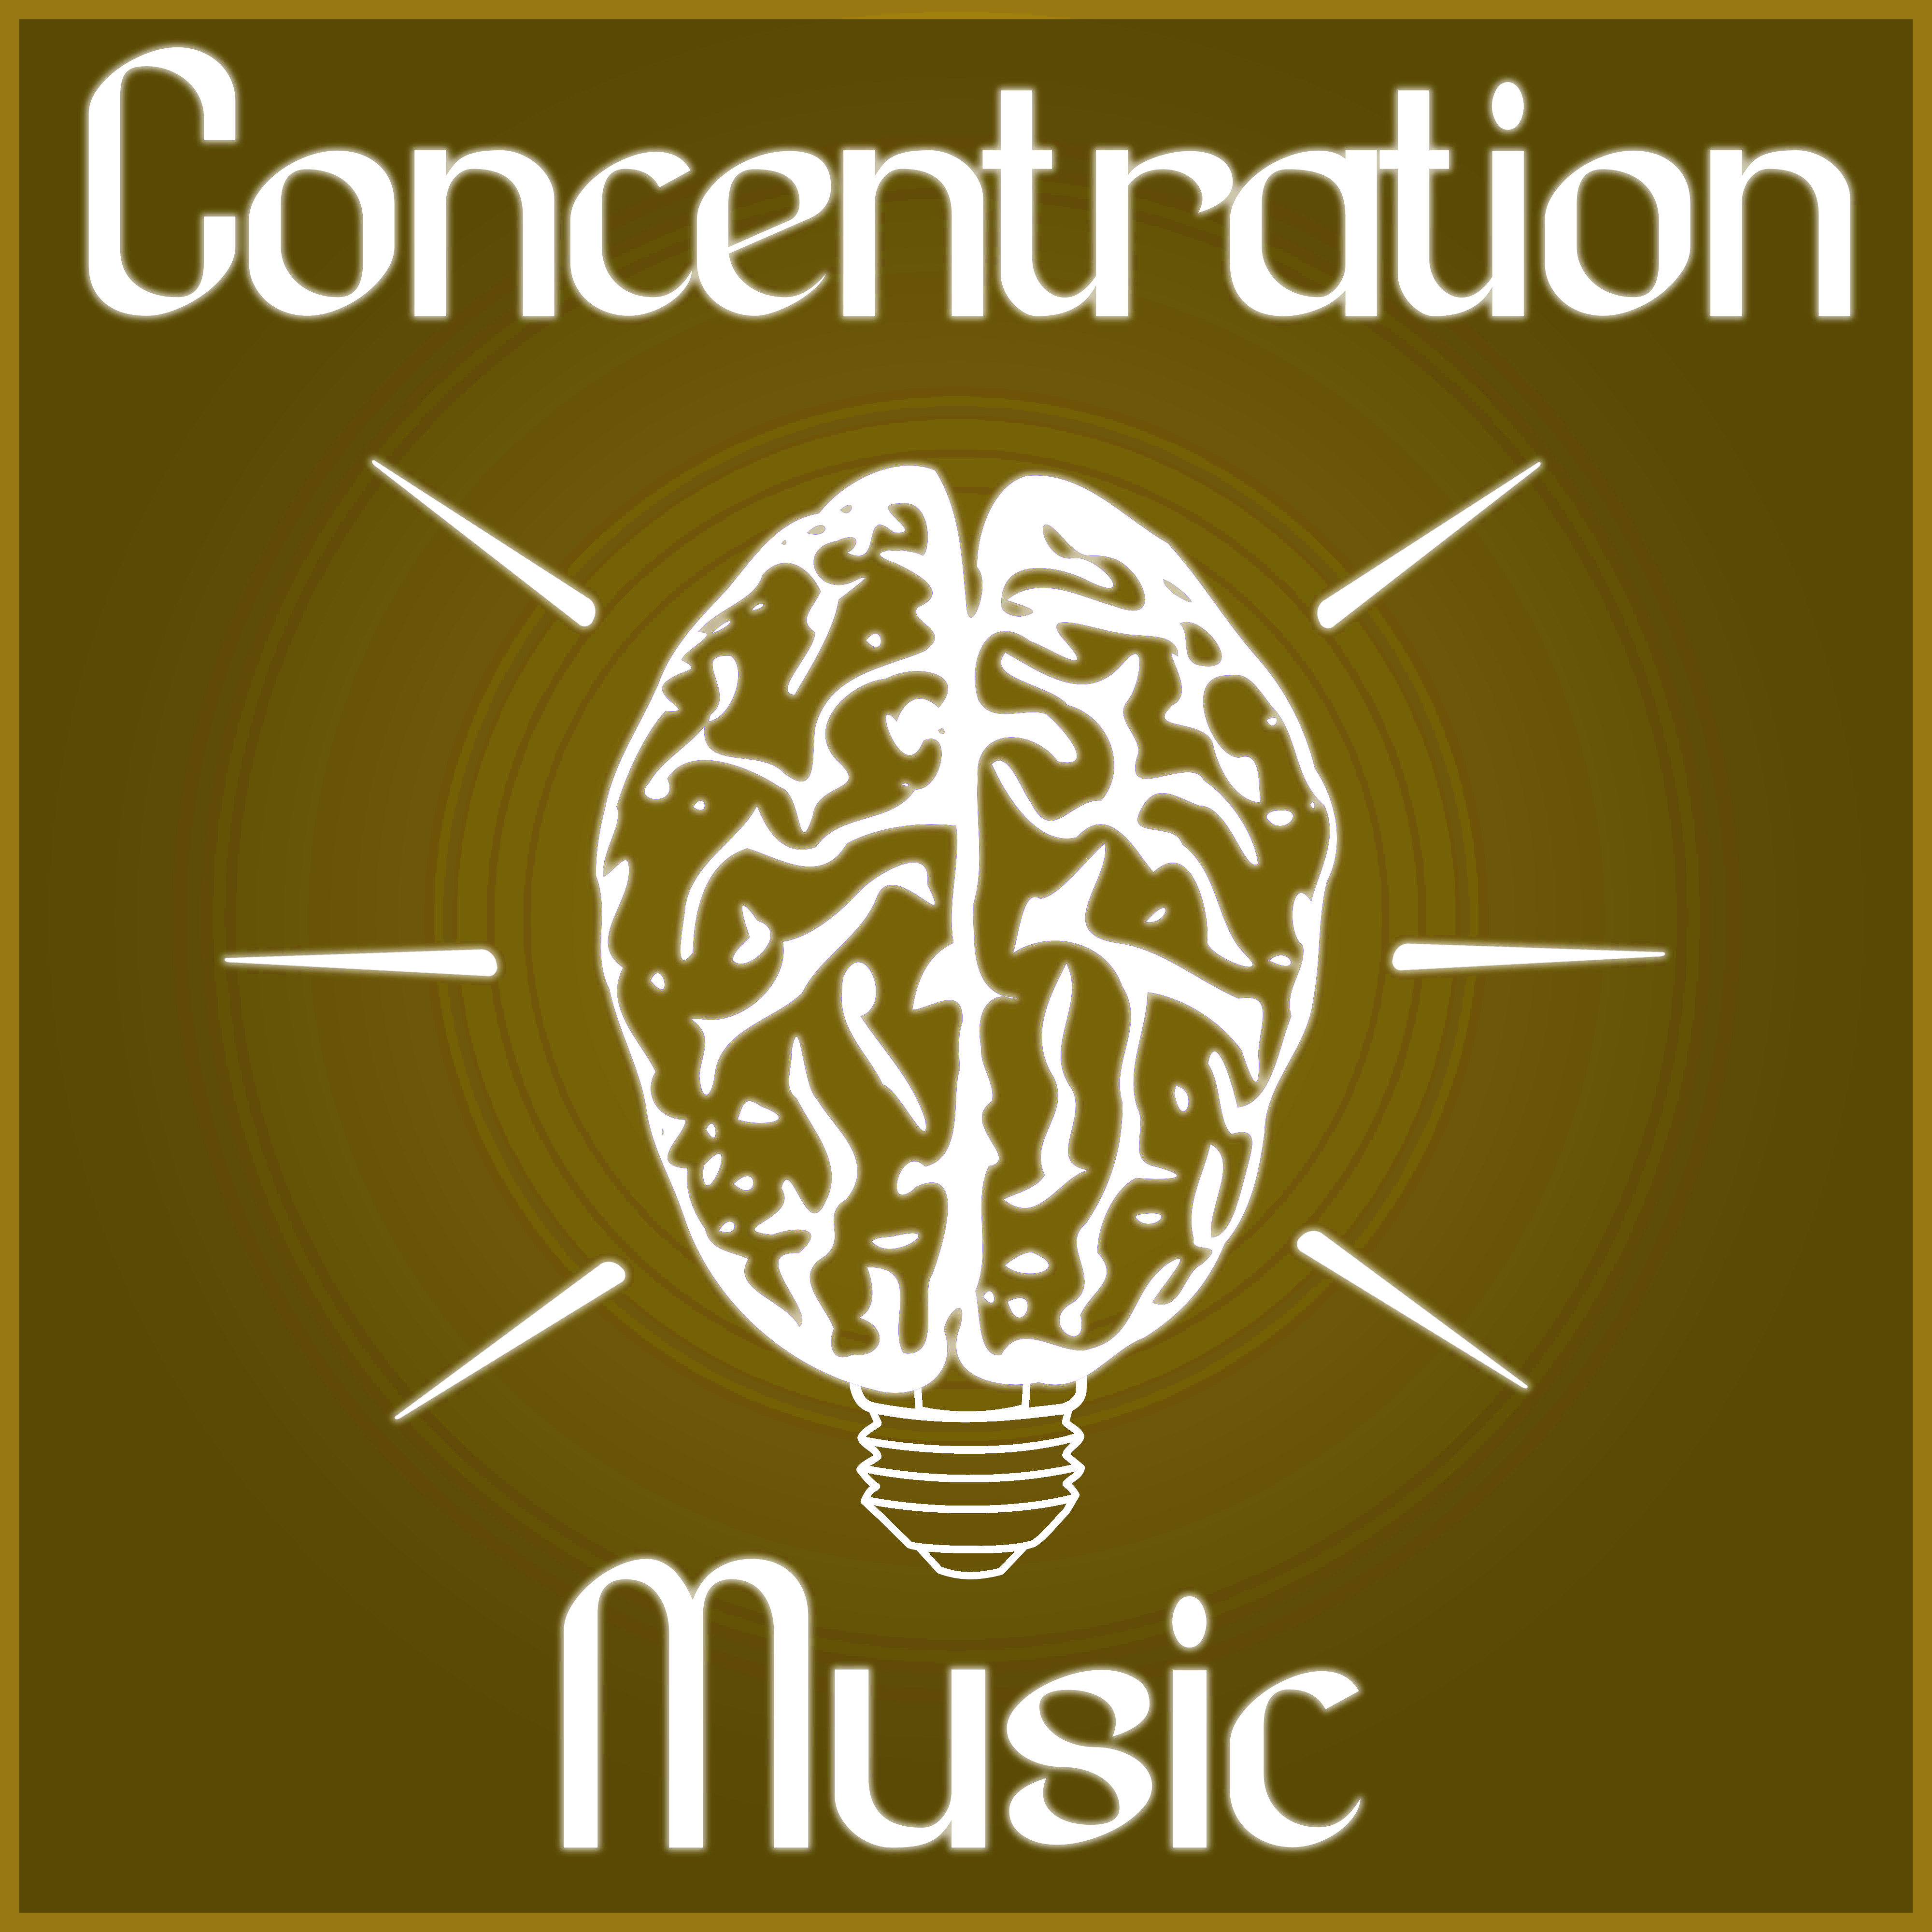 Concentration Music - Meditation and Focus on Learning, Concentration Music and Study Music for Your Brain Power, Instrumental Relaxing Music for Reading, New Age, Music for Thinking